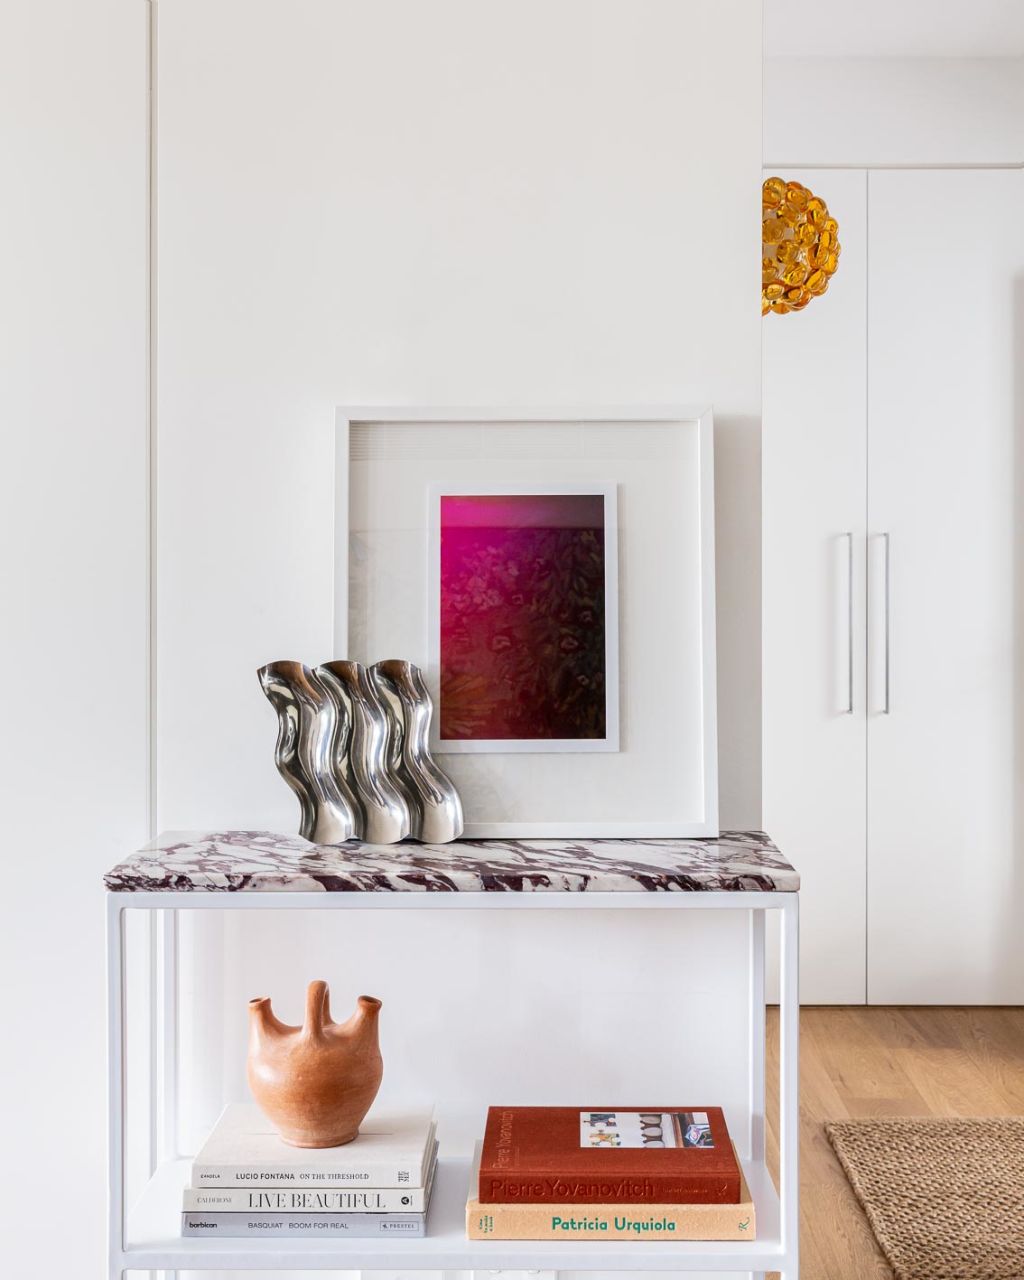 Patricia Urquiola’s Foscarini Caboche wall lights in amber add a pop of colour in the entrance. Photo: Chloe Lambert